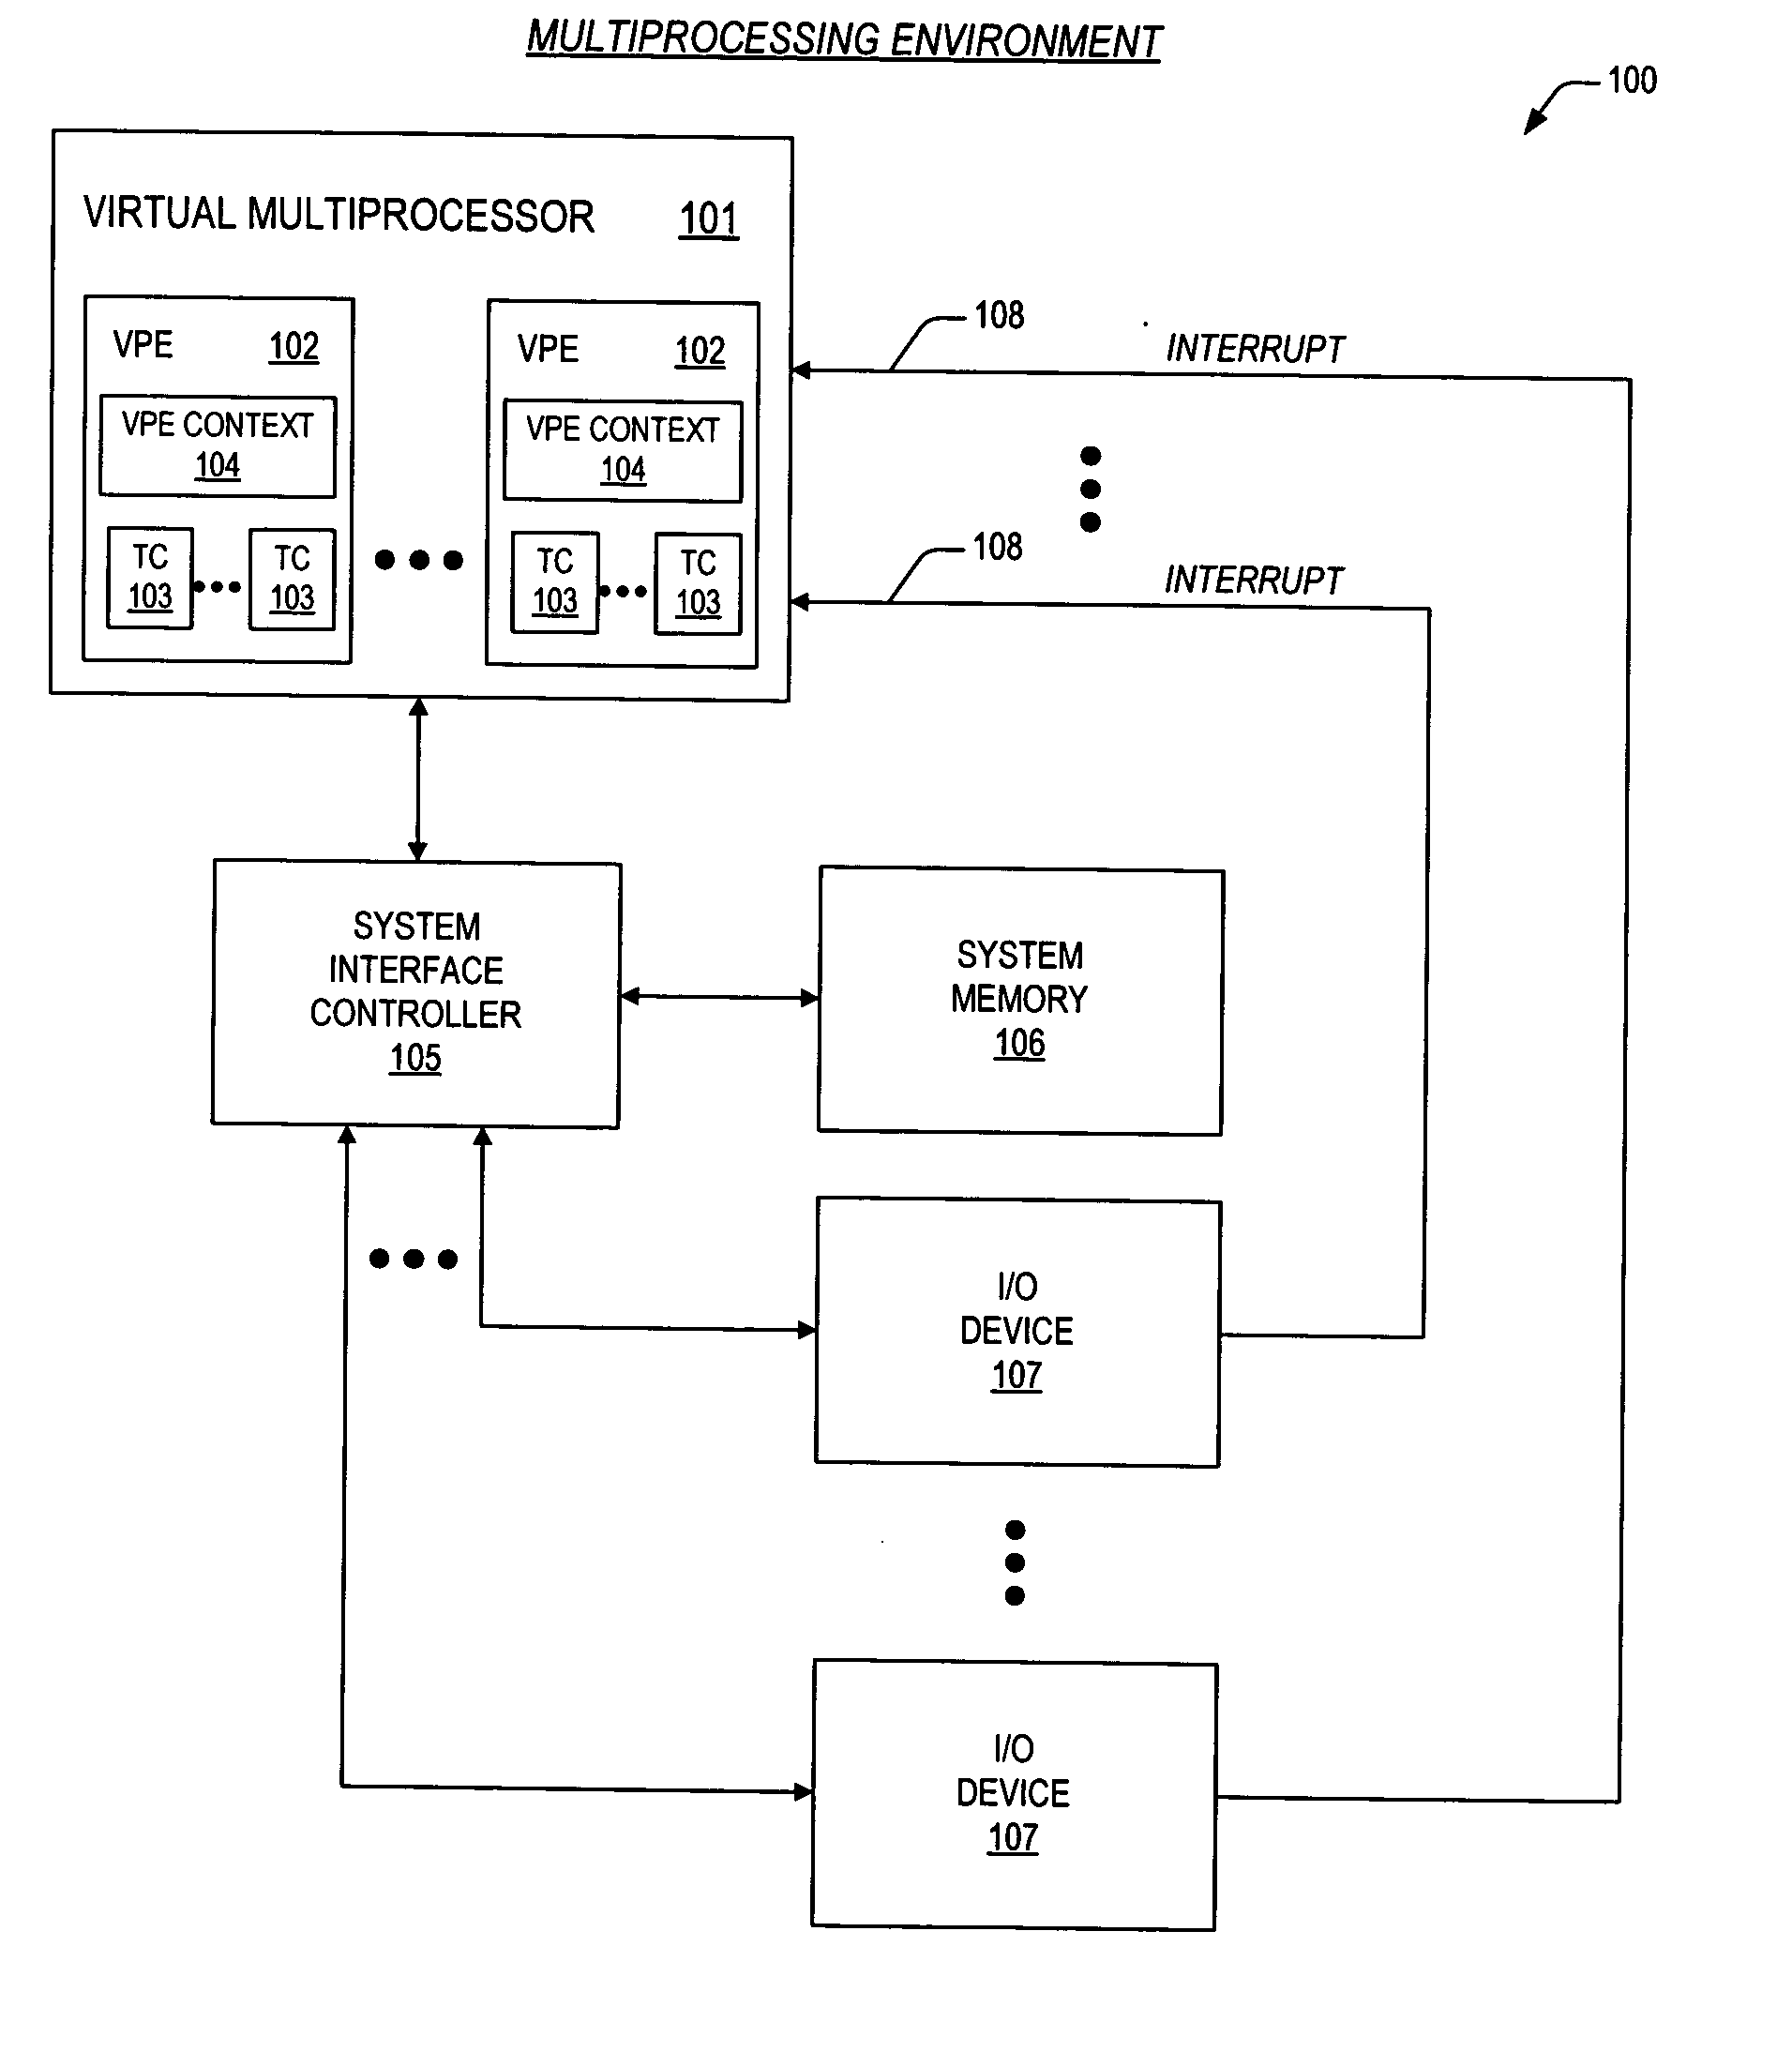 Mechanisms for dynamic configuration of virtual processor resources